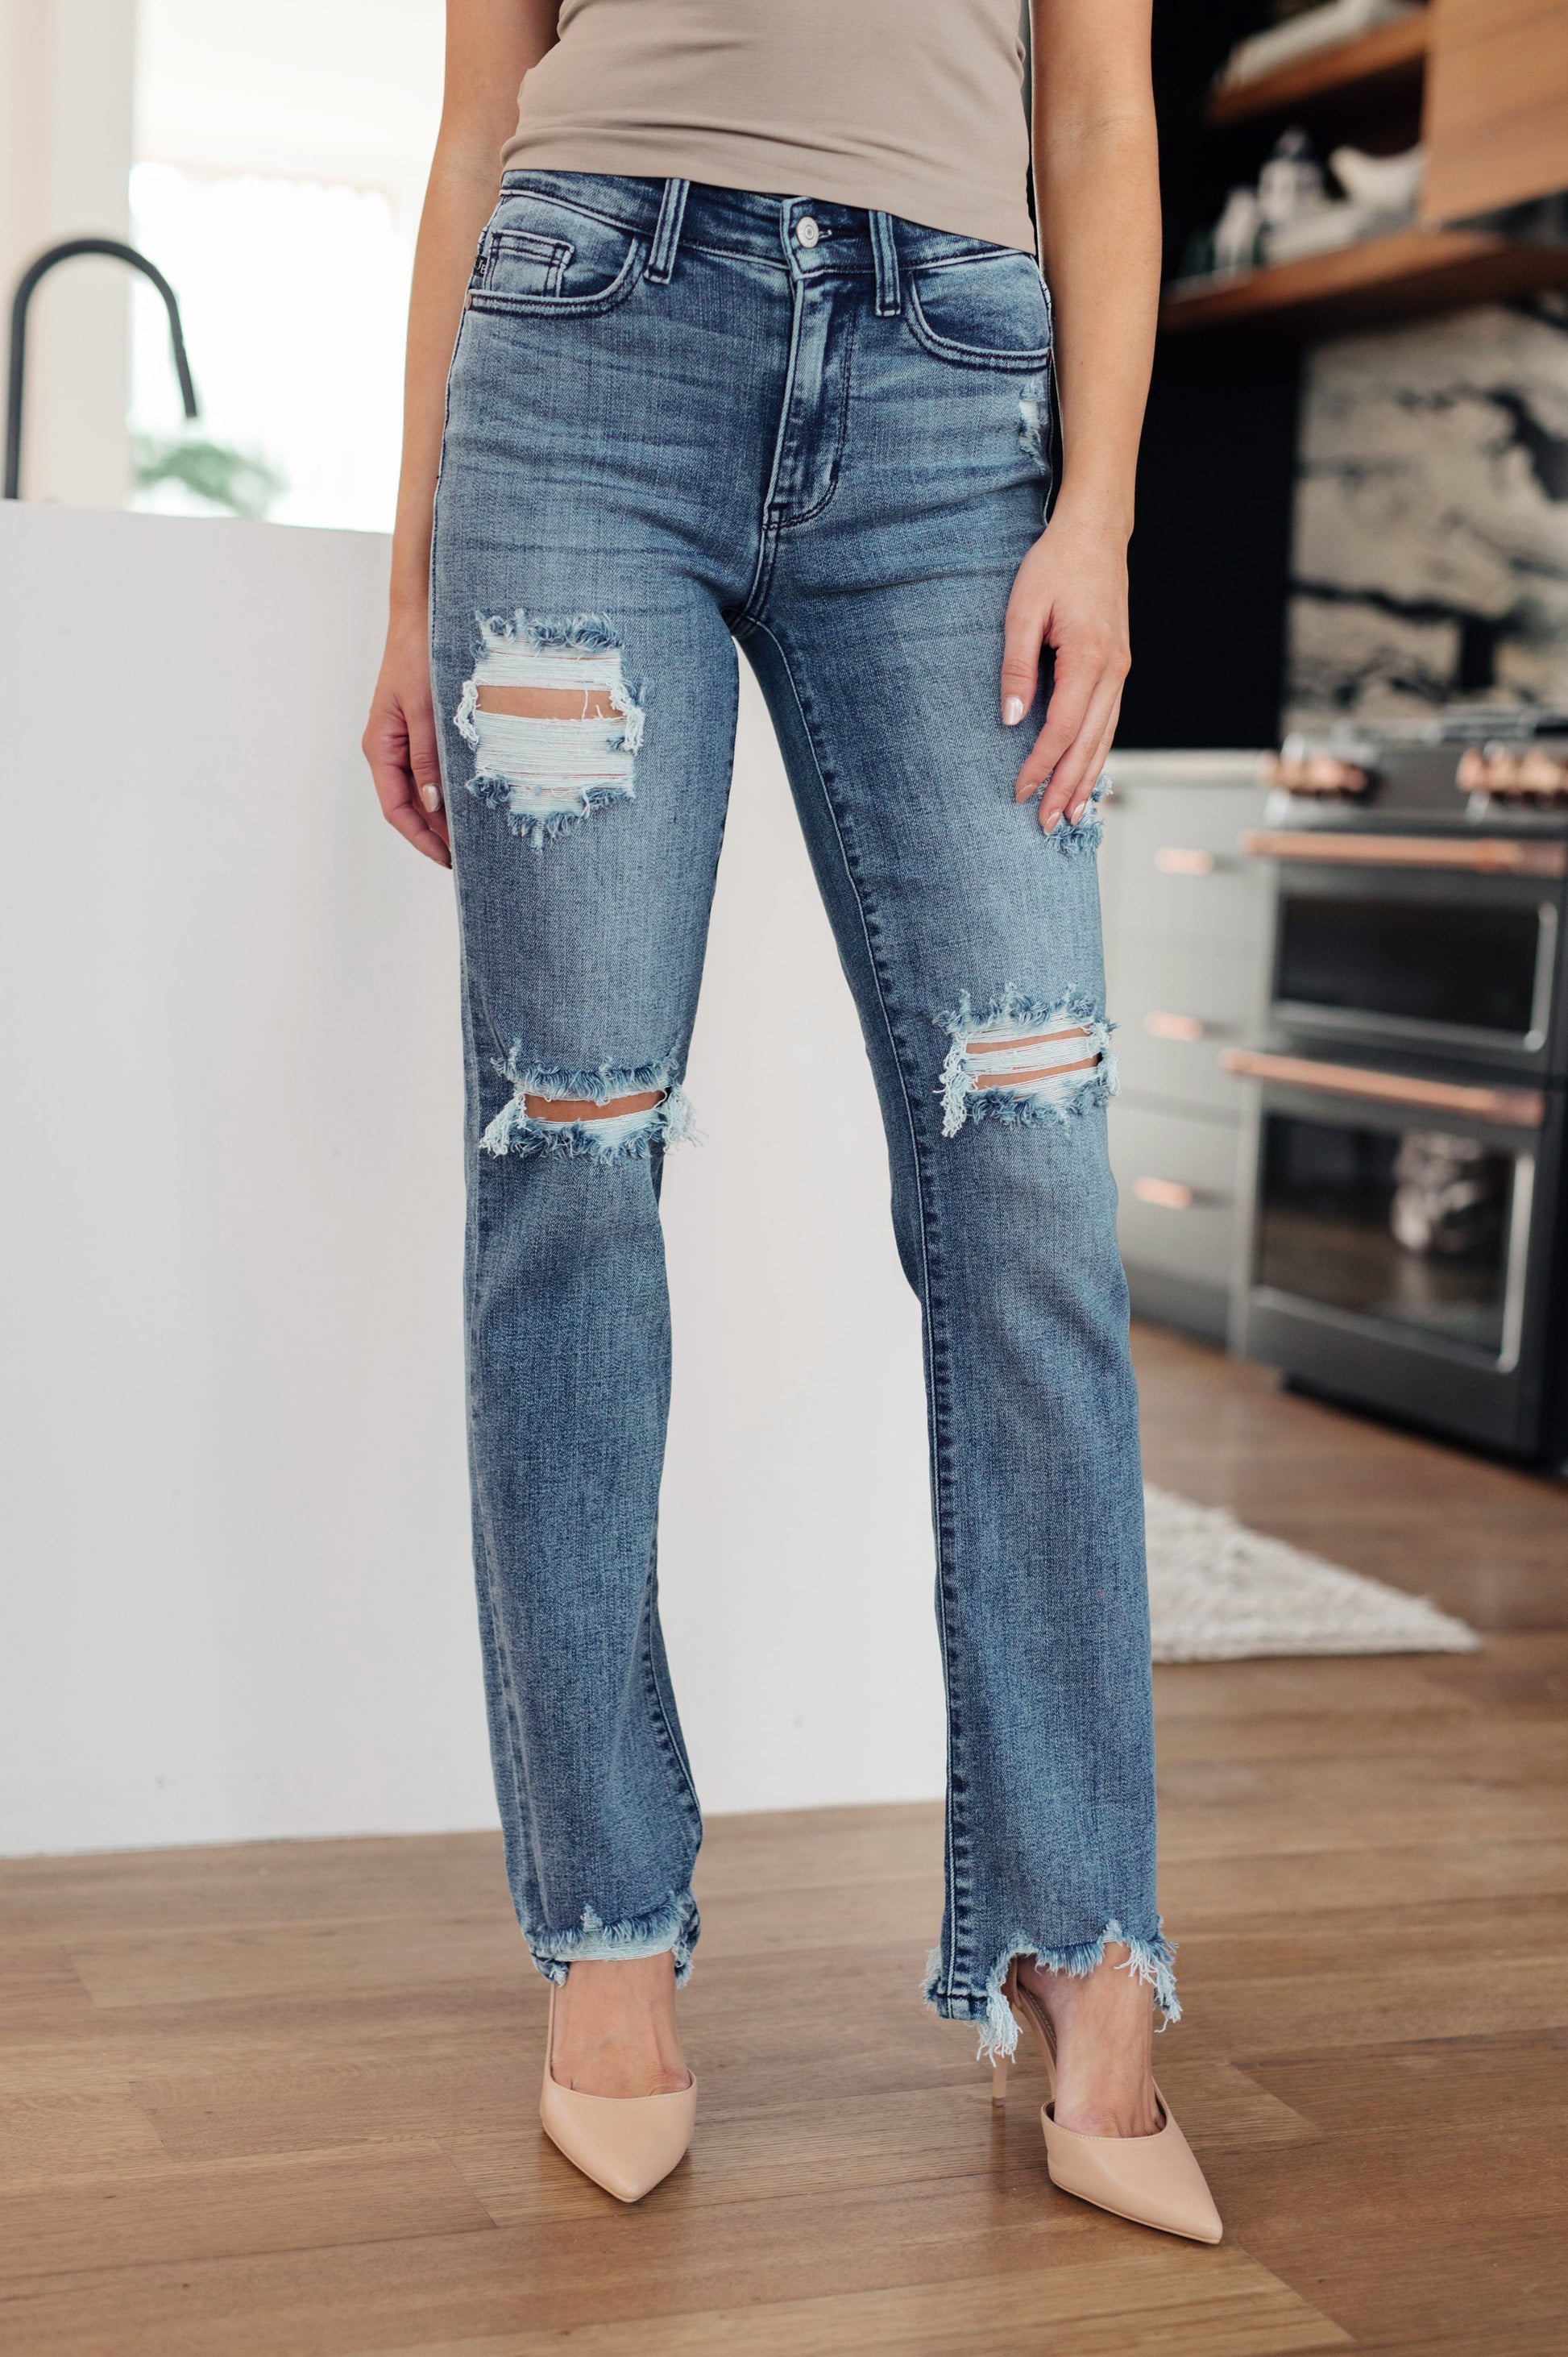 The O'Hara Destroyed Straight Jeans have the perfect balance of style, versatility, and timelessness! Featuring a stretch denim that shapes a mid rise waist with a five pocket cut and zipper fly. A slim fit through the thigh flares out at the ankle creating a straight cut silhouette. To top it off- these jeans have the perfect amount of distressing for an effortless cool girl look! 0 - 24W